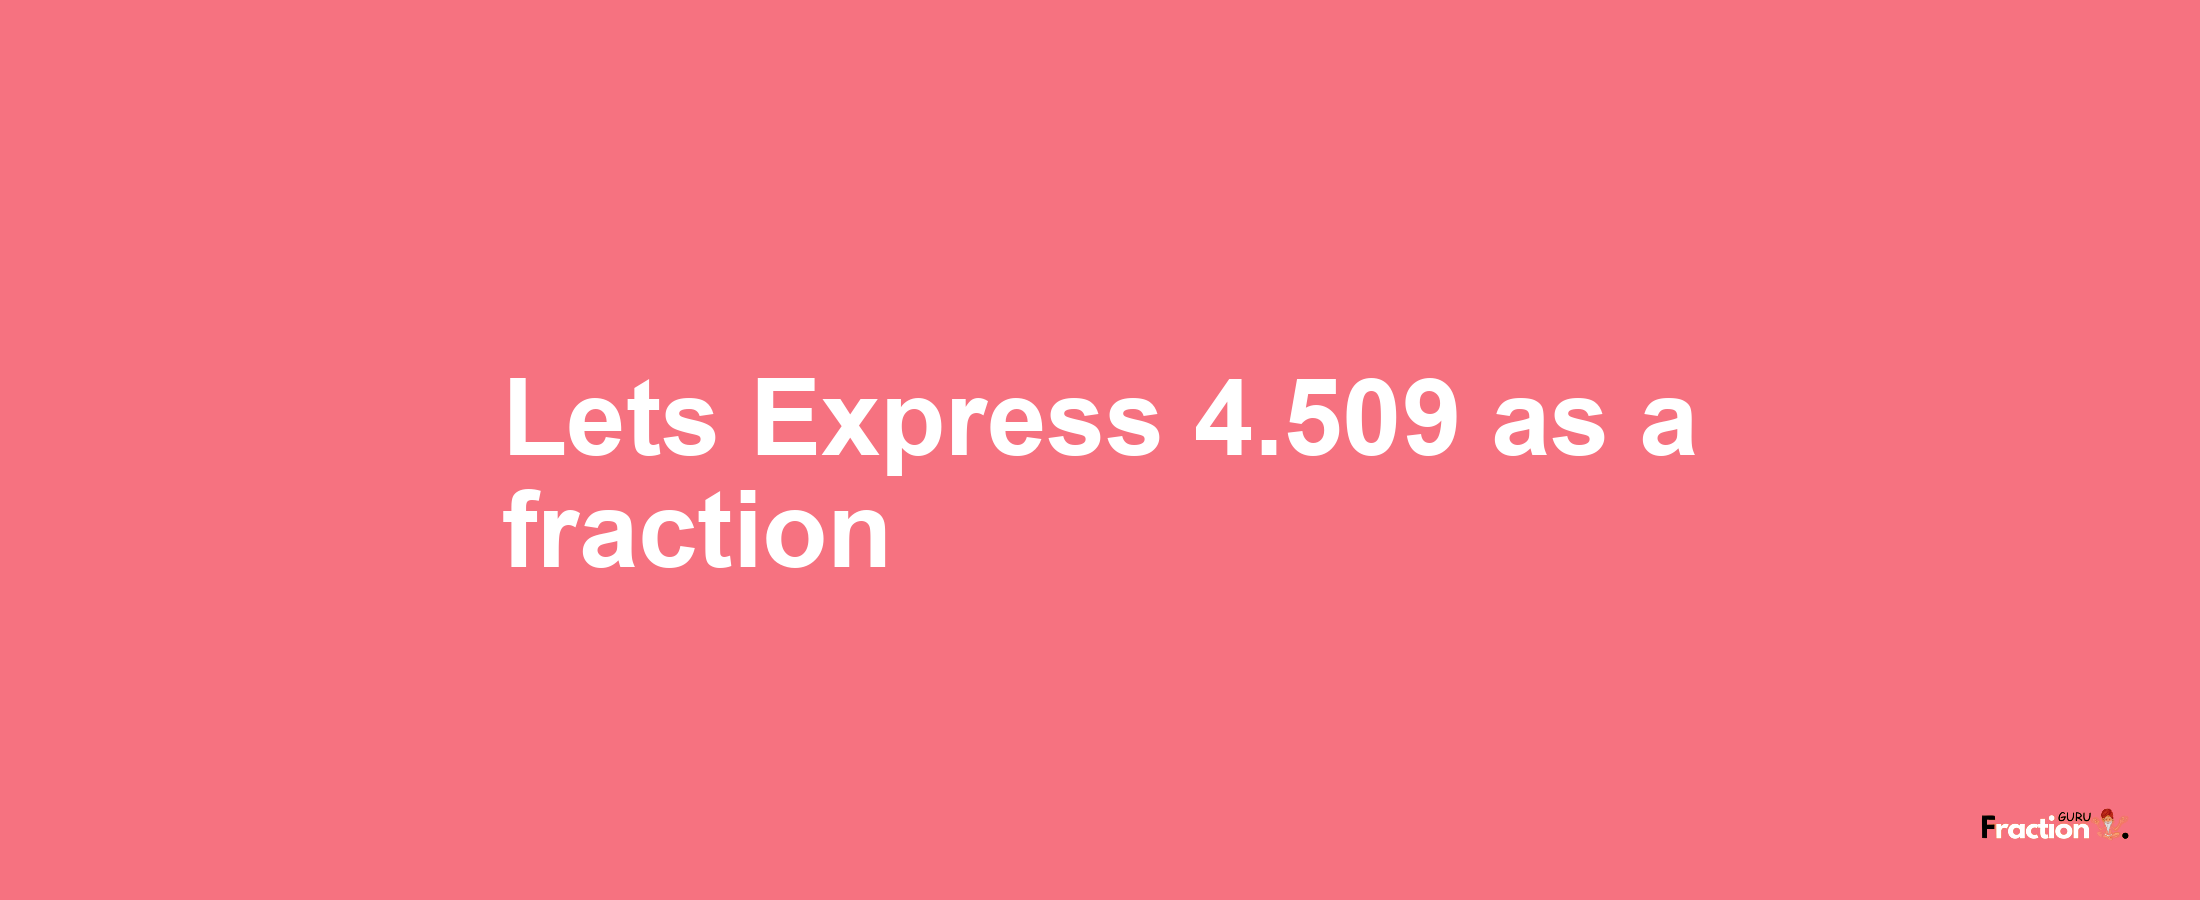 Lets Express 4.509 as afraction